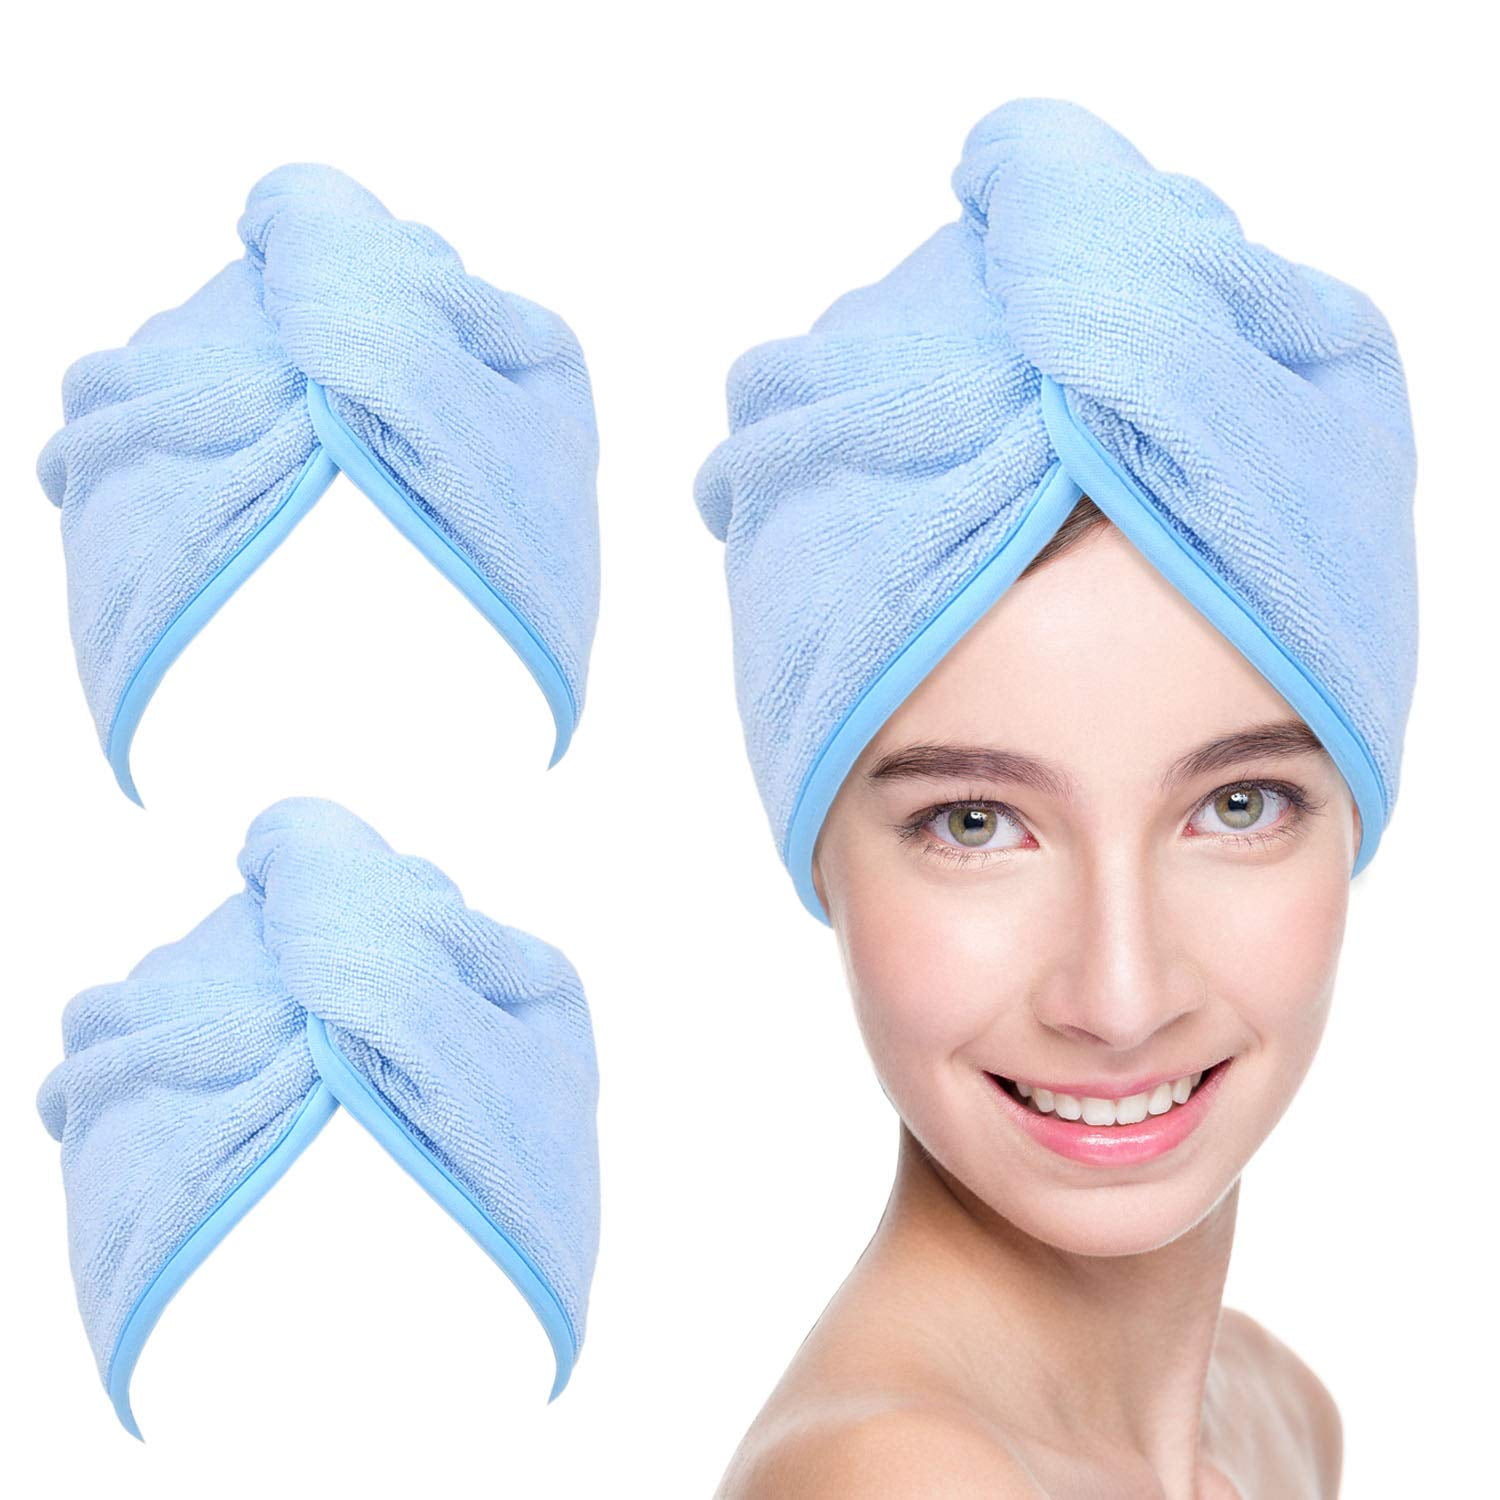 Hair Towel Turban with Loop and Button Fastener 2 Pack Hair Towel Wrap Super Absorbent Quick Drying Hair Towel Microfibre Hair Towel